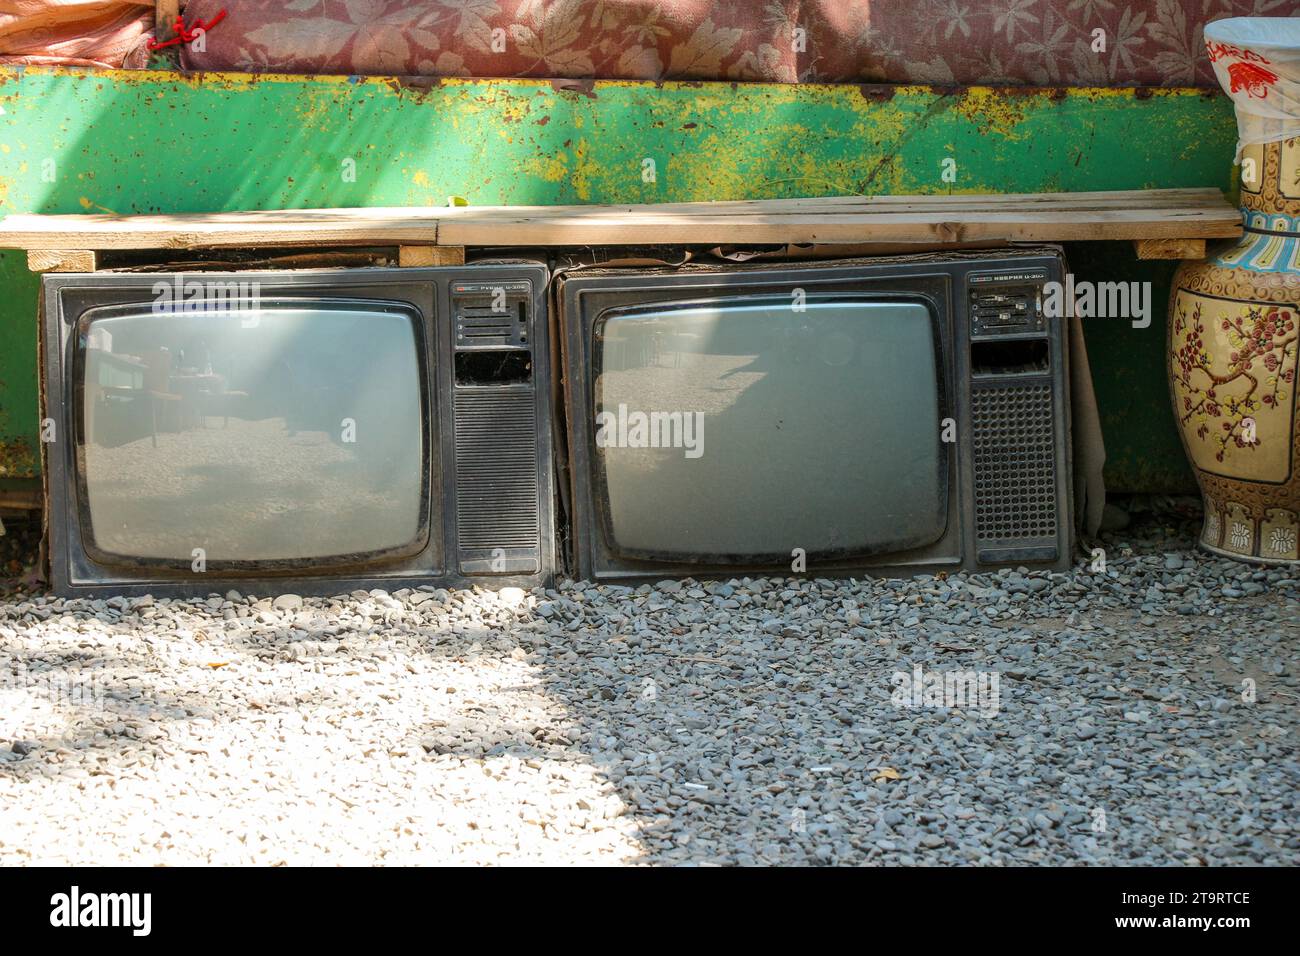 A Broken Television Abandoned on the ground outside in the street Stock Photo